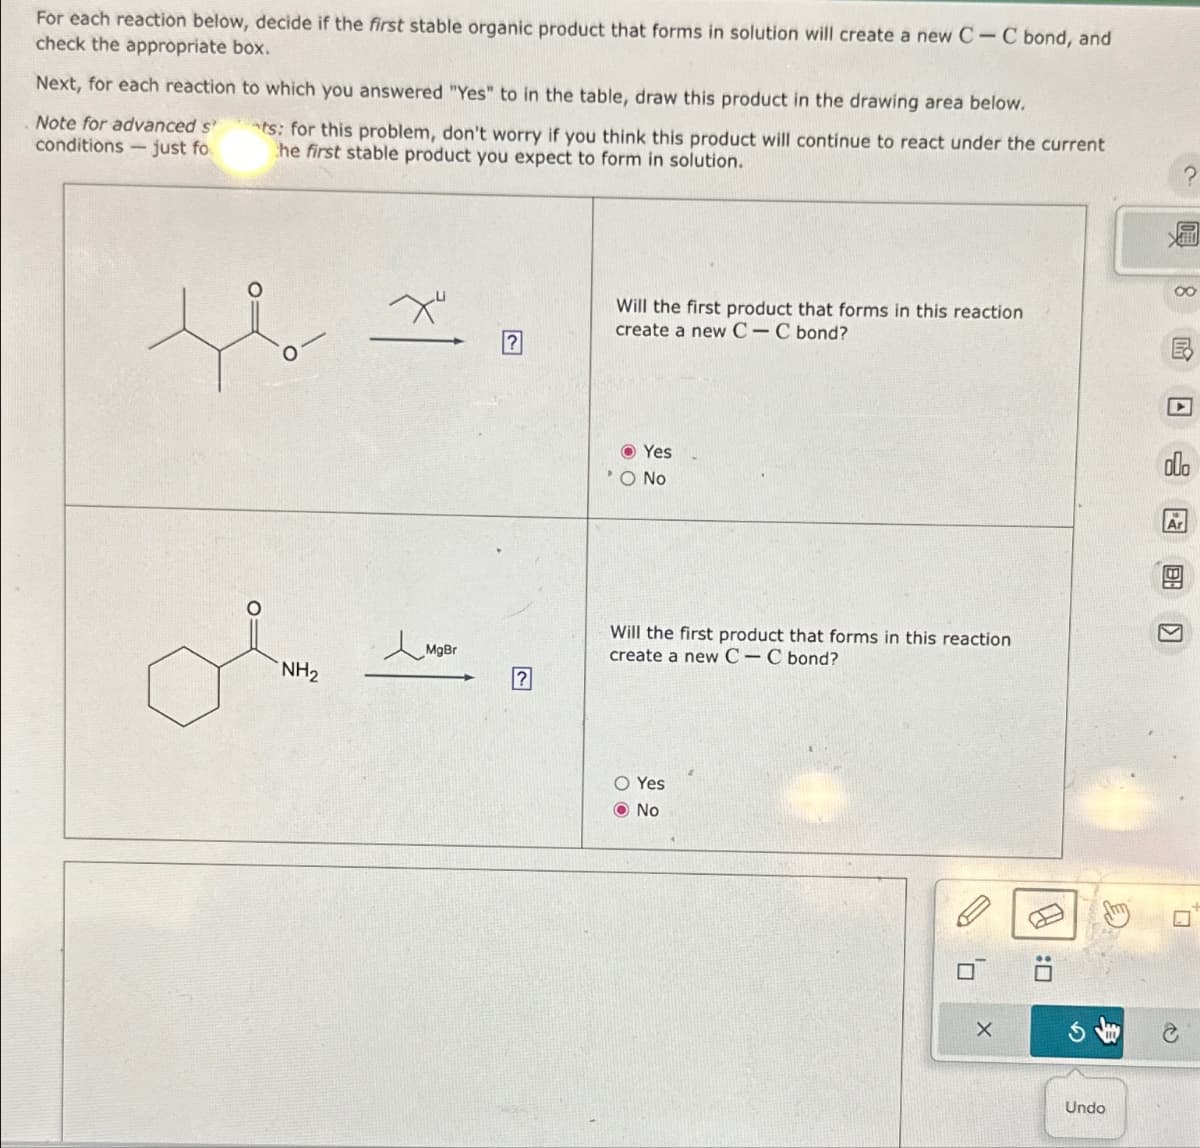 For each reaction below, decide if the first stable organic product that forms in solution will create a new C-C bond, and
check the appropriate box.
Next, for each reaction to which you answered "Yes" to in the table, draw this product in the drawing area below.
Note for advanced st
conditions just fo
ts: for this problem, don't worry if you think this product will continue to react under the current
he first stable product you expect to form in solution.
о
о
+ ?
Will the first product that forms in this reaction
create a new CC bond?
ملی
MgBr
?
Yes
O No
Will the first product that forms in this reaction
create a new C-C bond?
O Yes
No
?
8民口
X
olo
:
G
Undo
Q
P